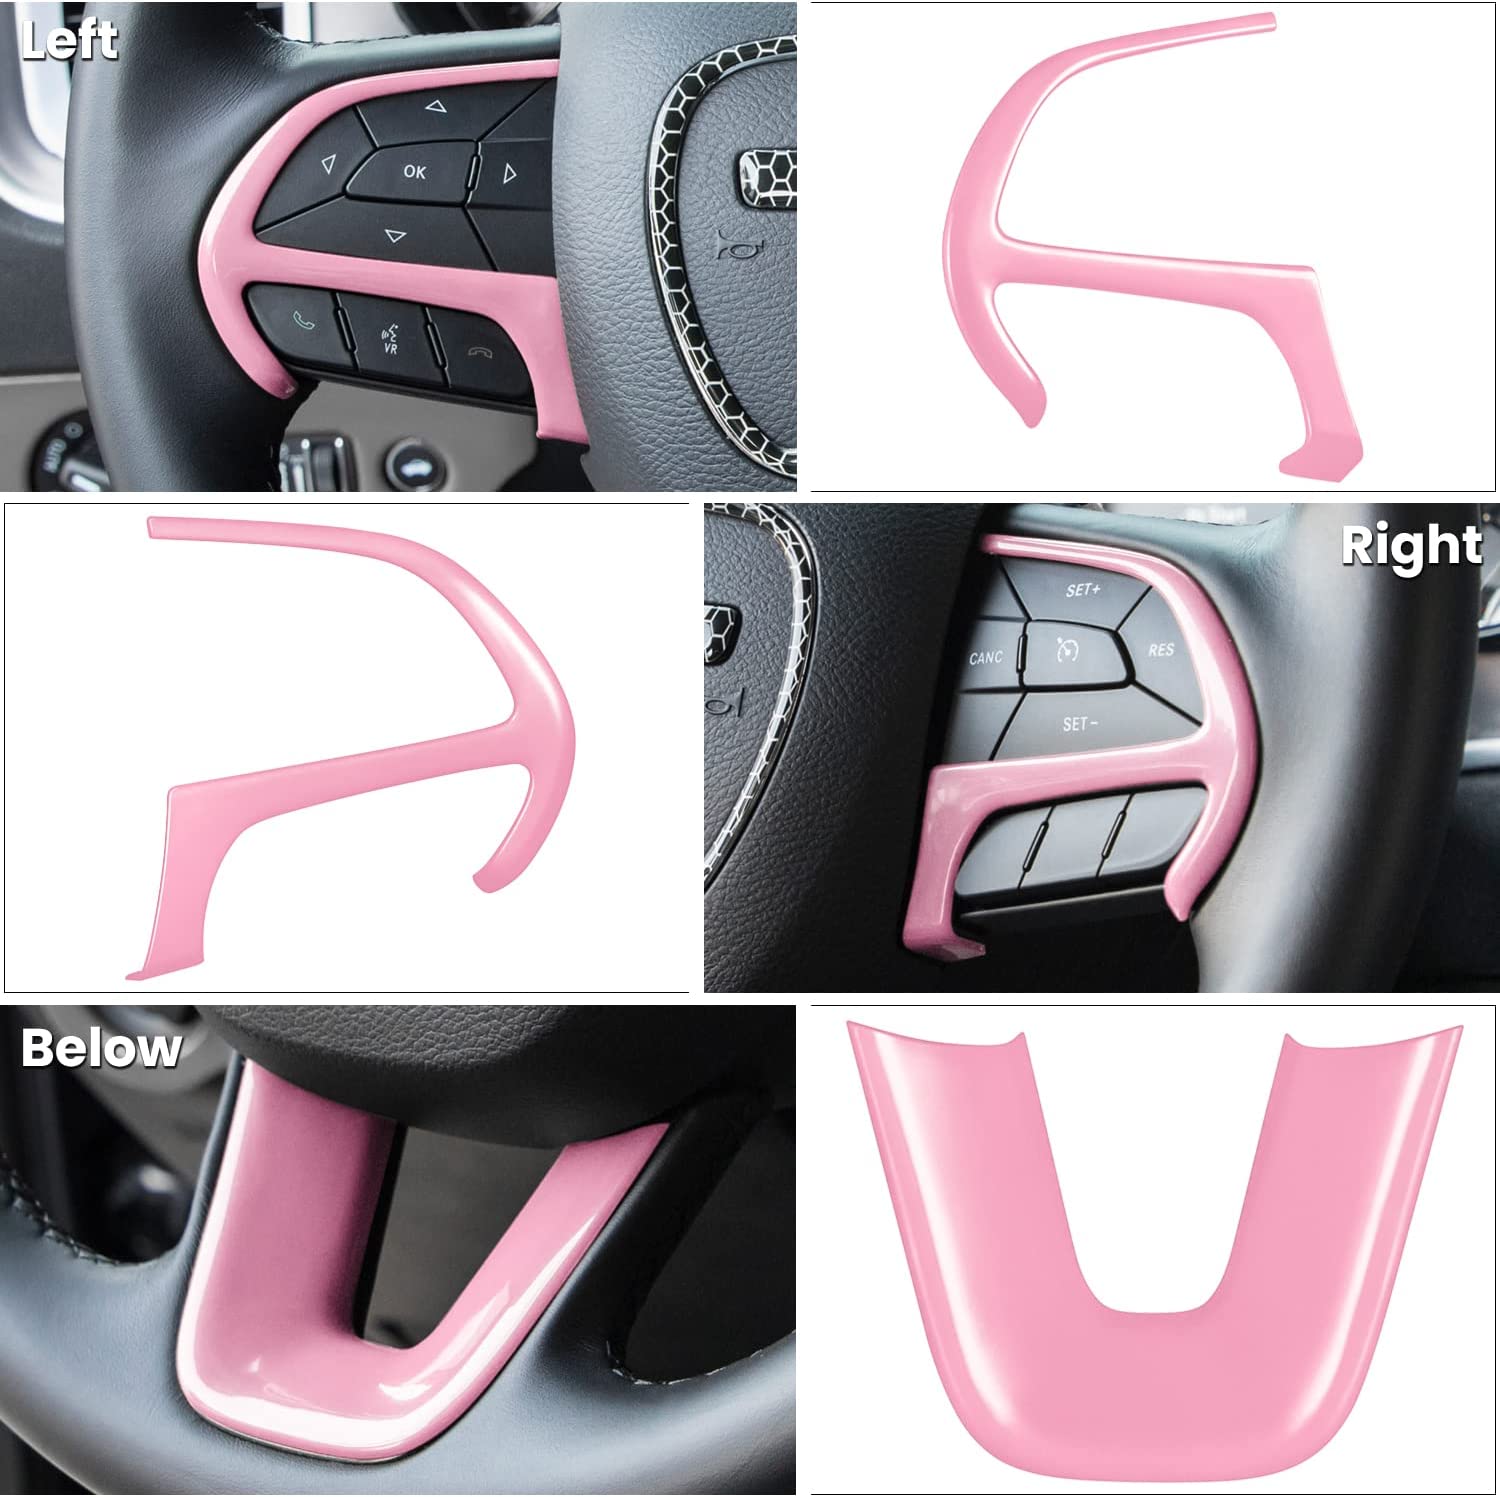 Steering Wheel Cover Trim Interior Accessories Decoration Kit for 2015-2021 Dodge Challenger Charger, for 2014-2021 Dodge Durango & Jeep Grand Cherokee SRT8 (Pink 3PCS) - Delicate Leather